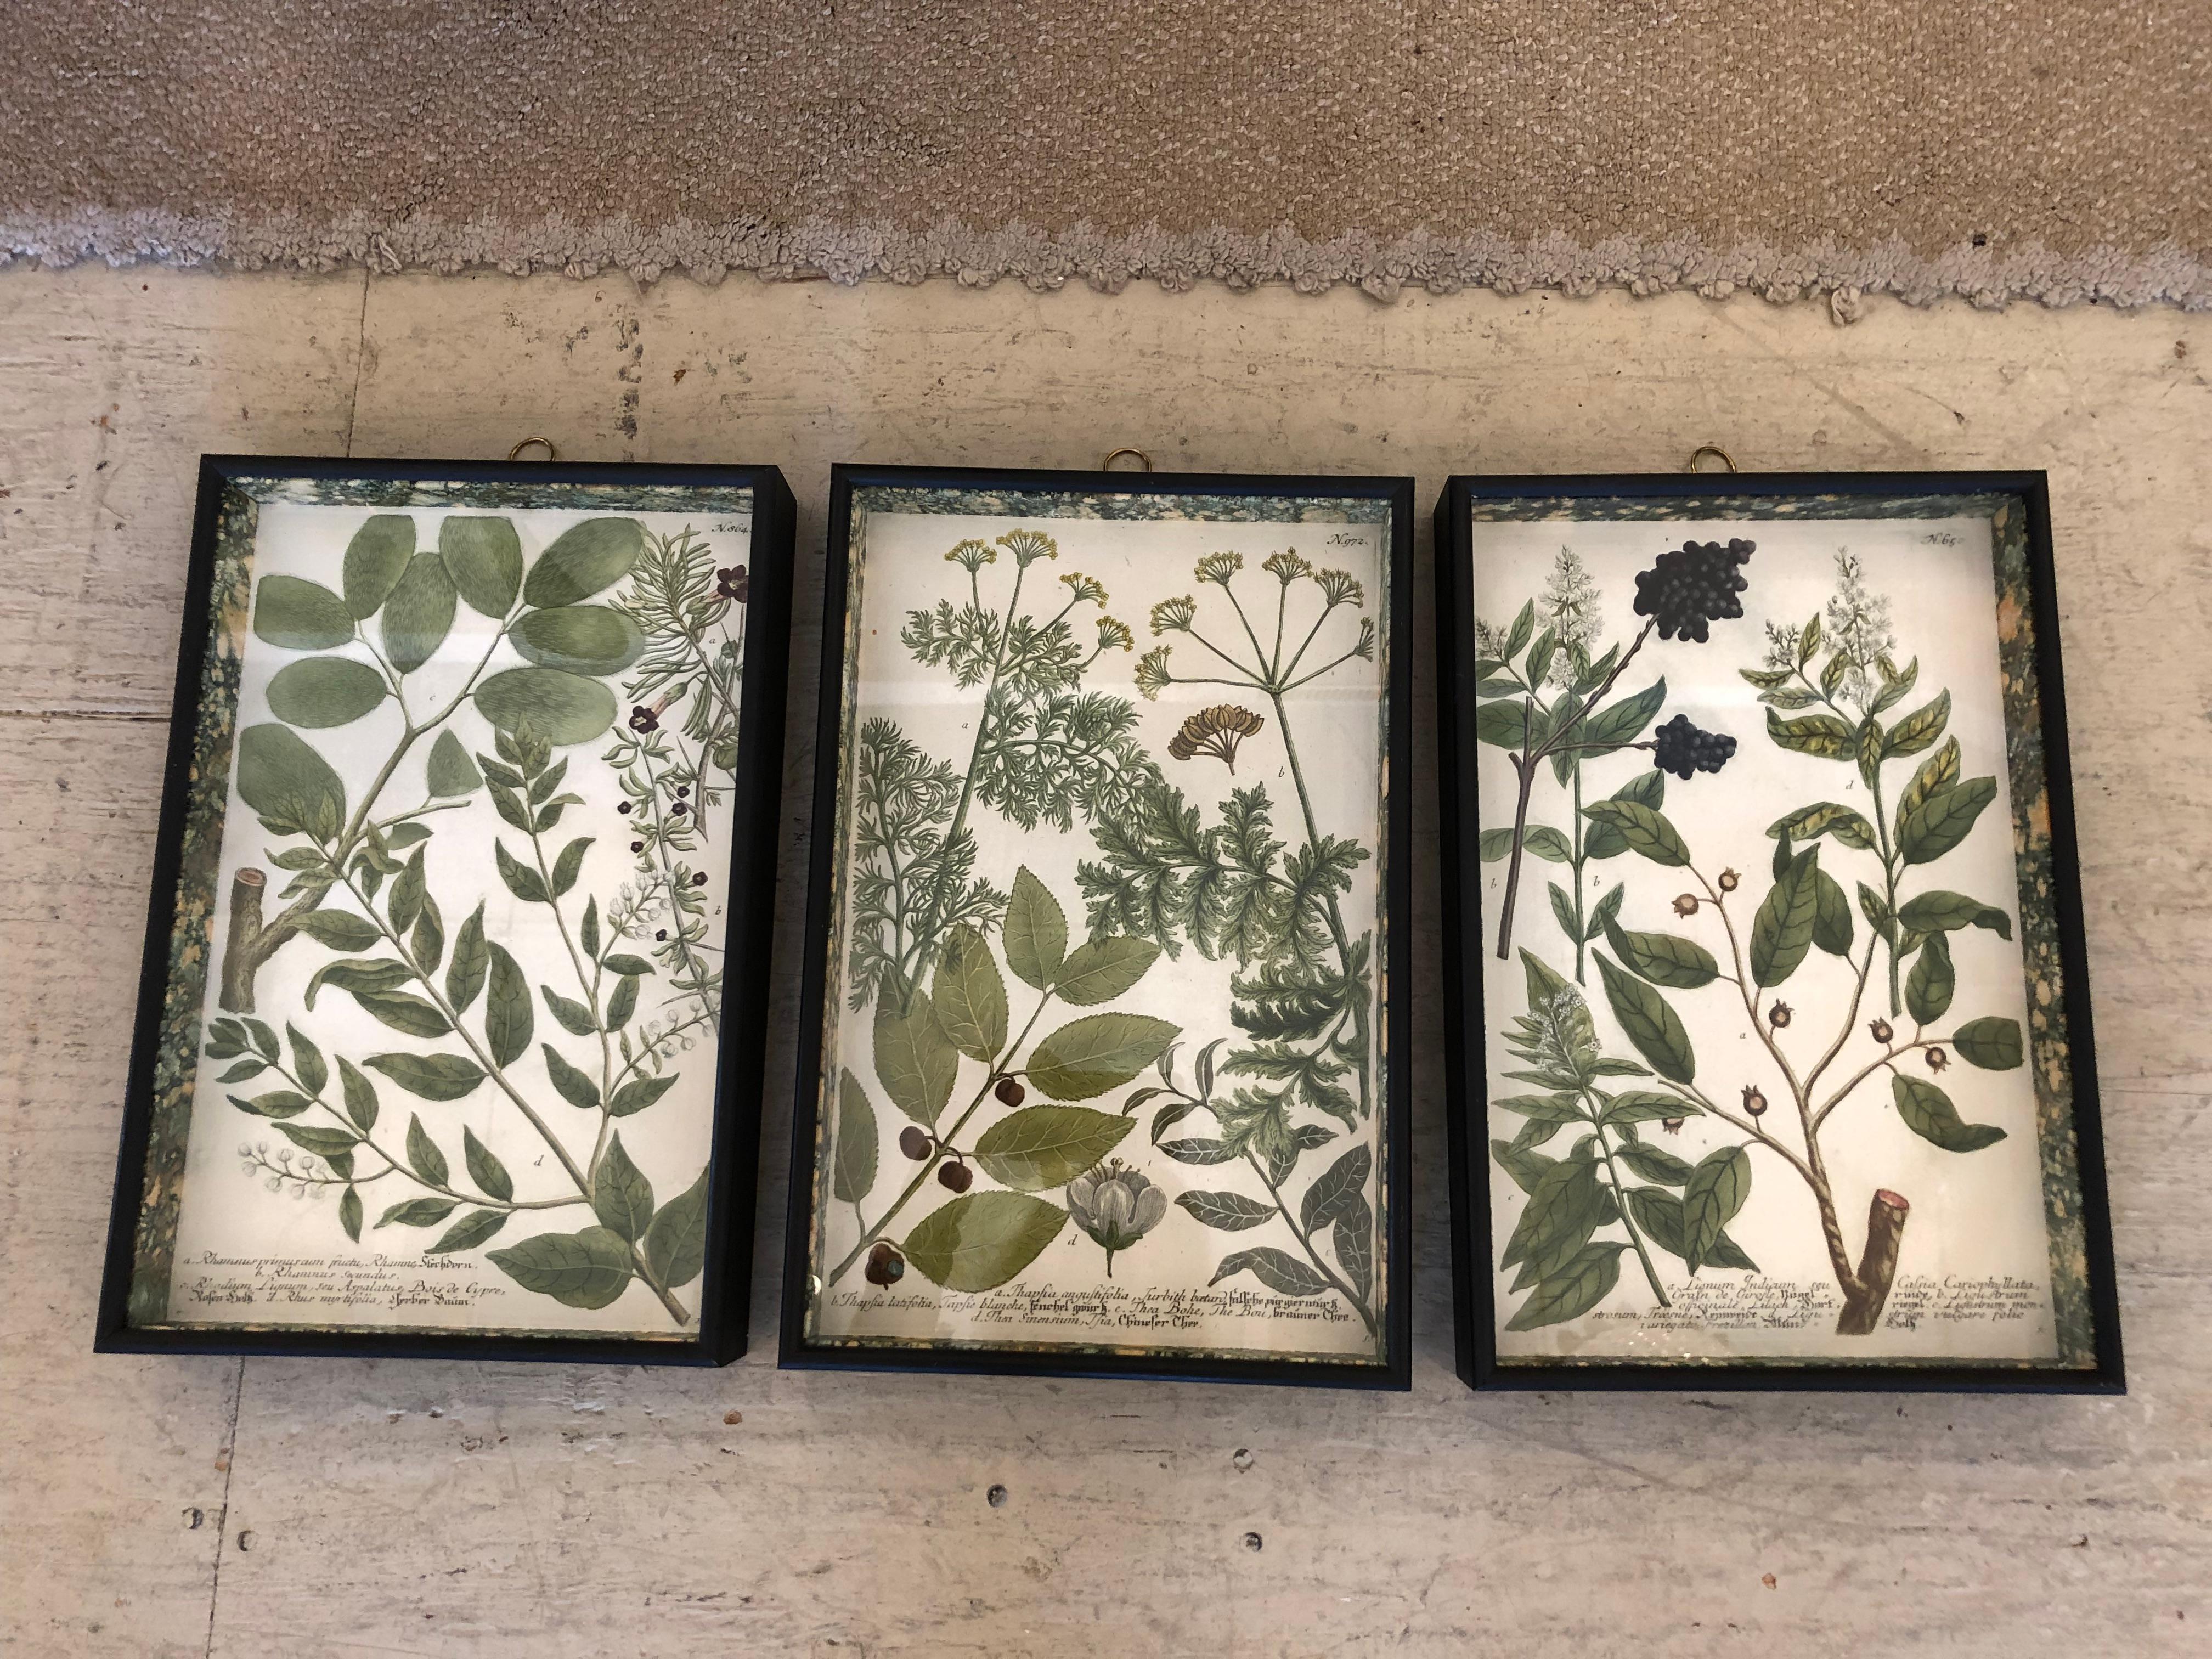 Lovely collection of 3 vintage botanical prints more recently made into striking shadowboxes lined on the interior edges and backs with marbleized paper. Found at an antique show in Nantucket and oozing with charm.